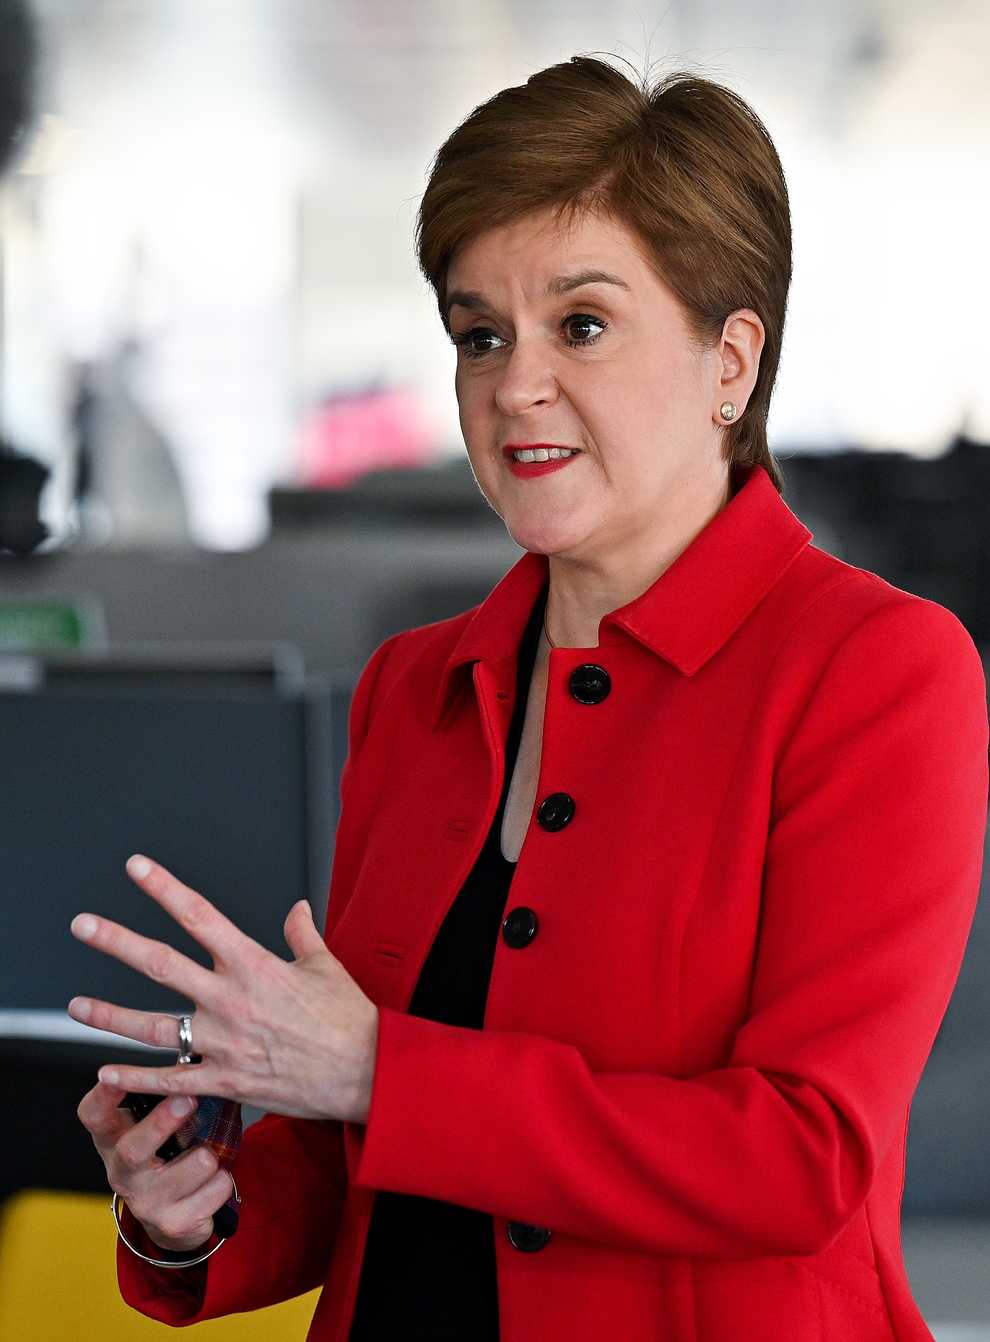 The First Minister said she had ‘expressed frustration’ about the situation to Michael Gove on Monday (Jeff J Mitchell/PA)